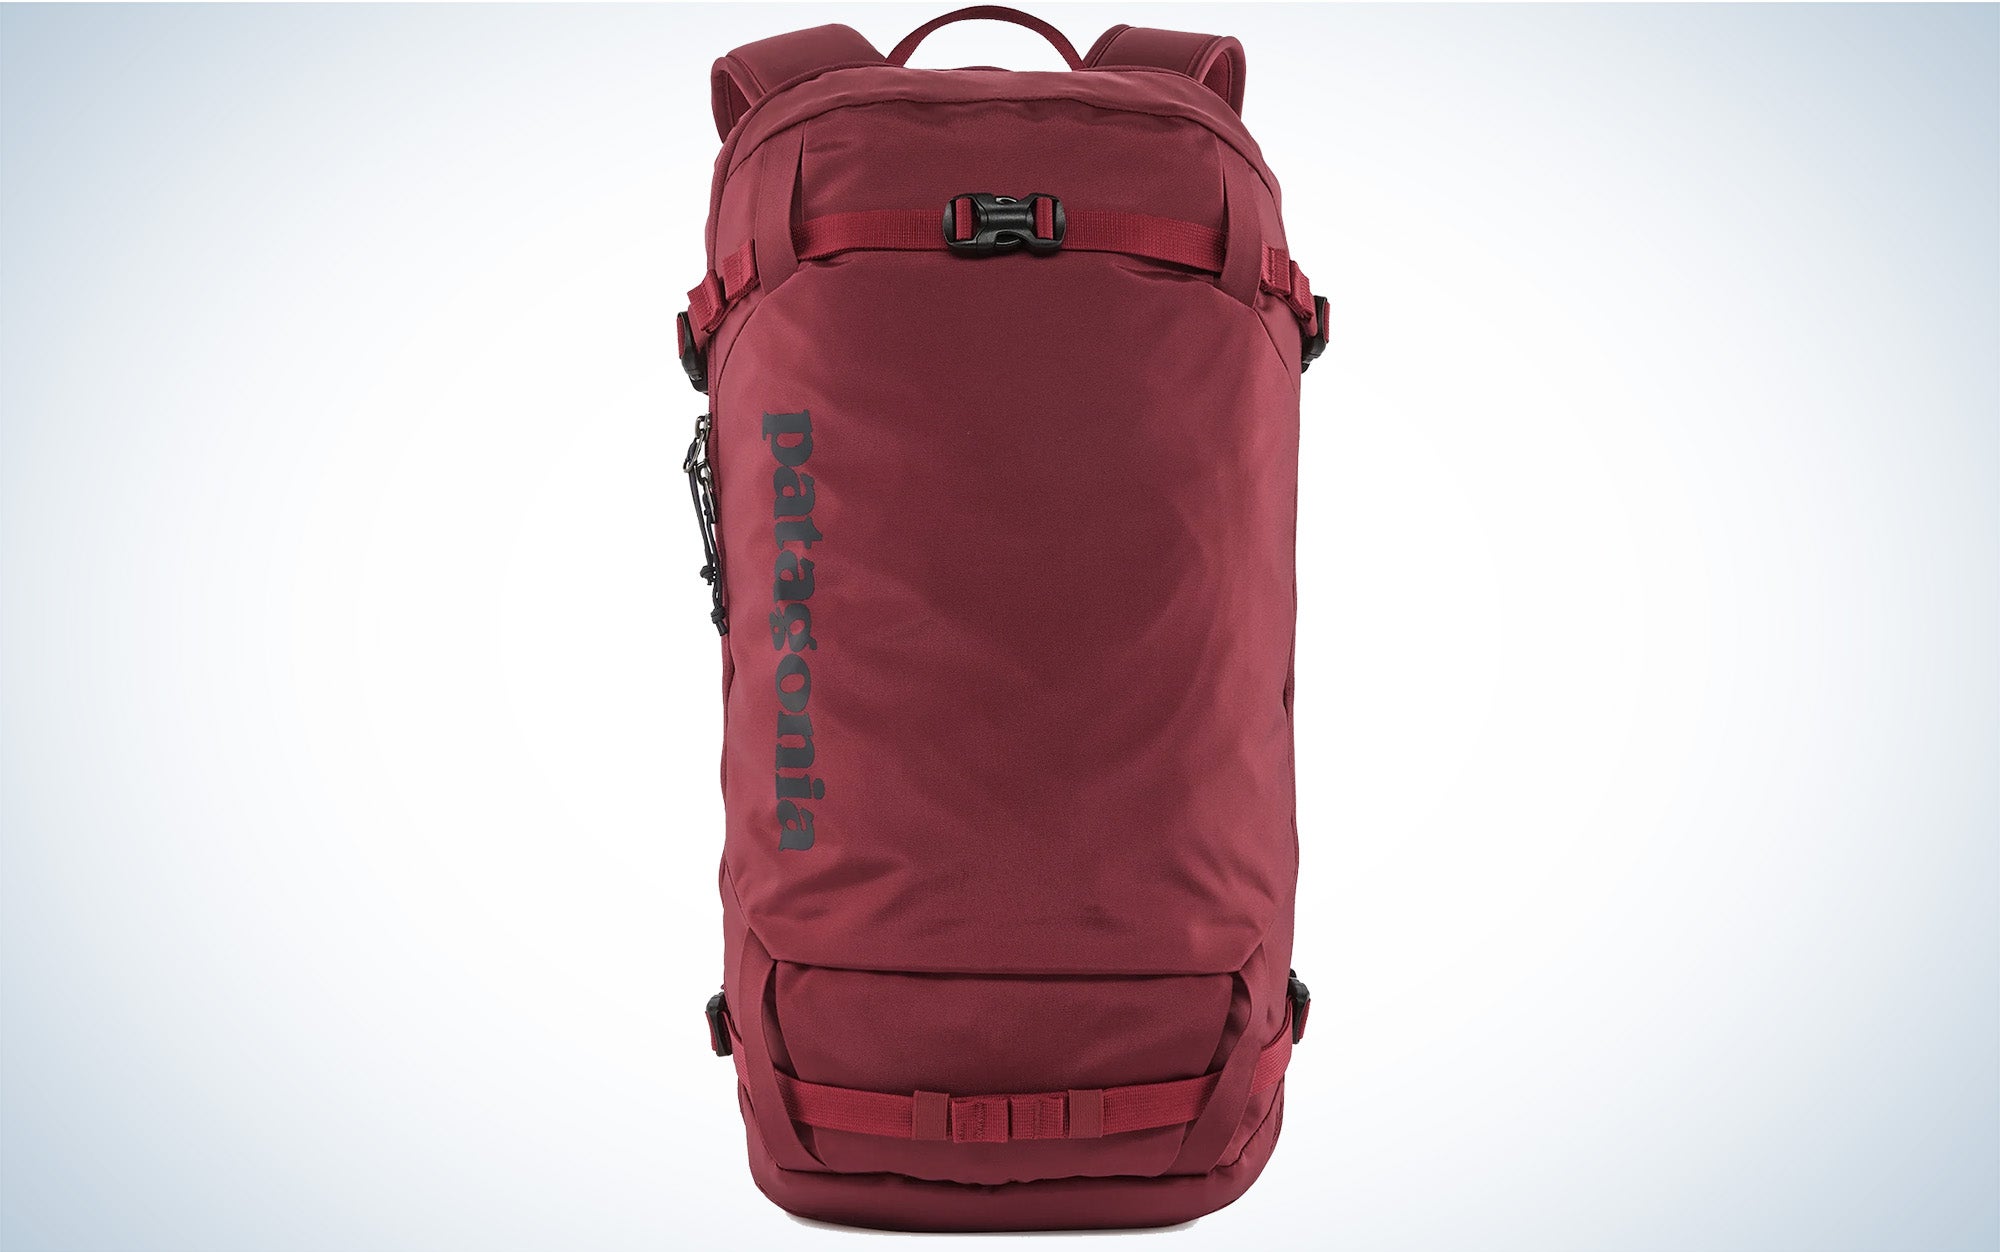 The Patagonia SnowDrifter 30L is one of the best winter backpacks for a full day.